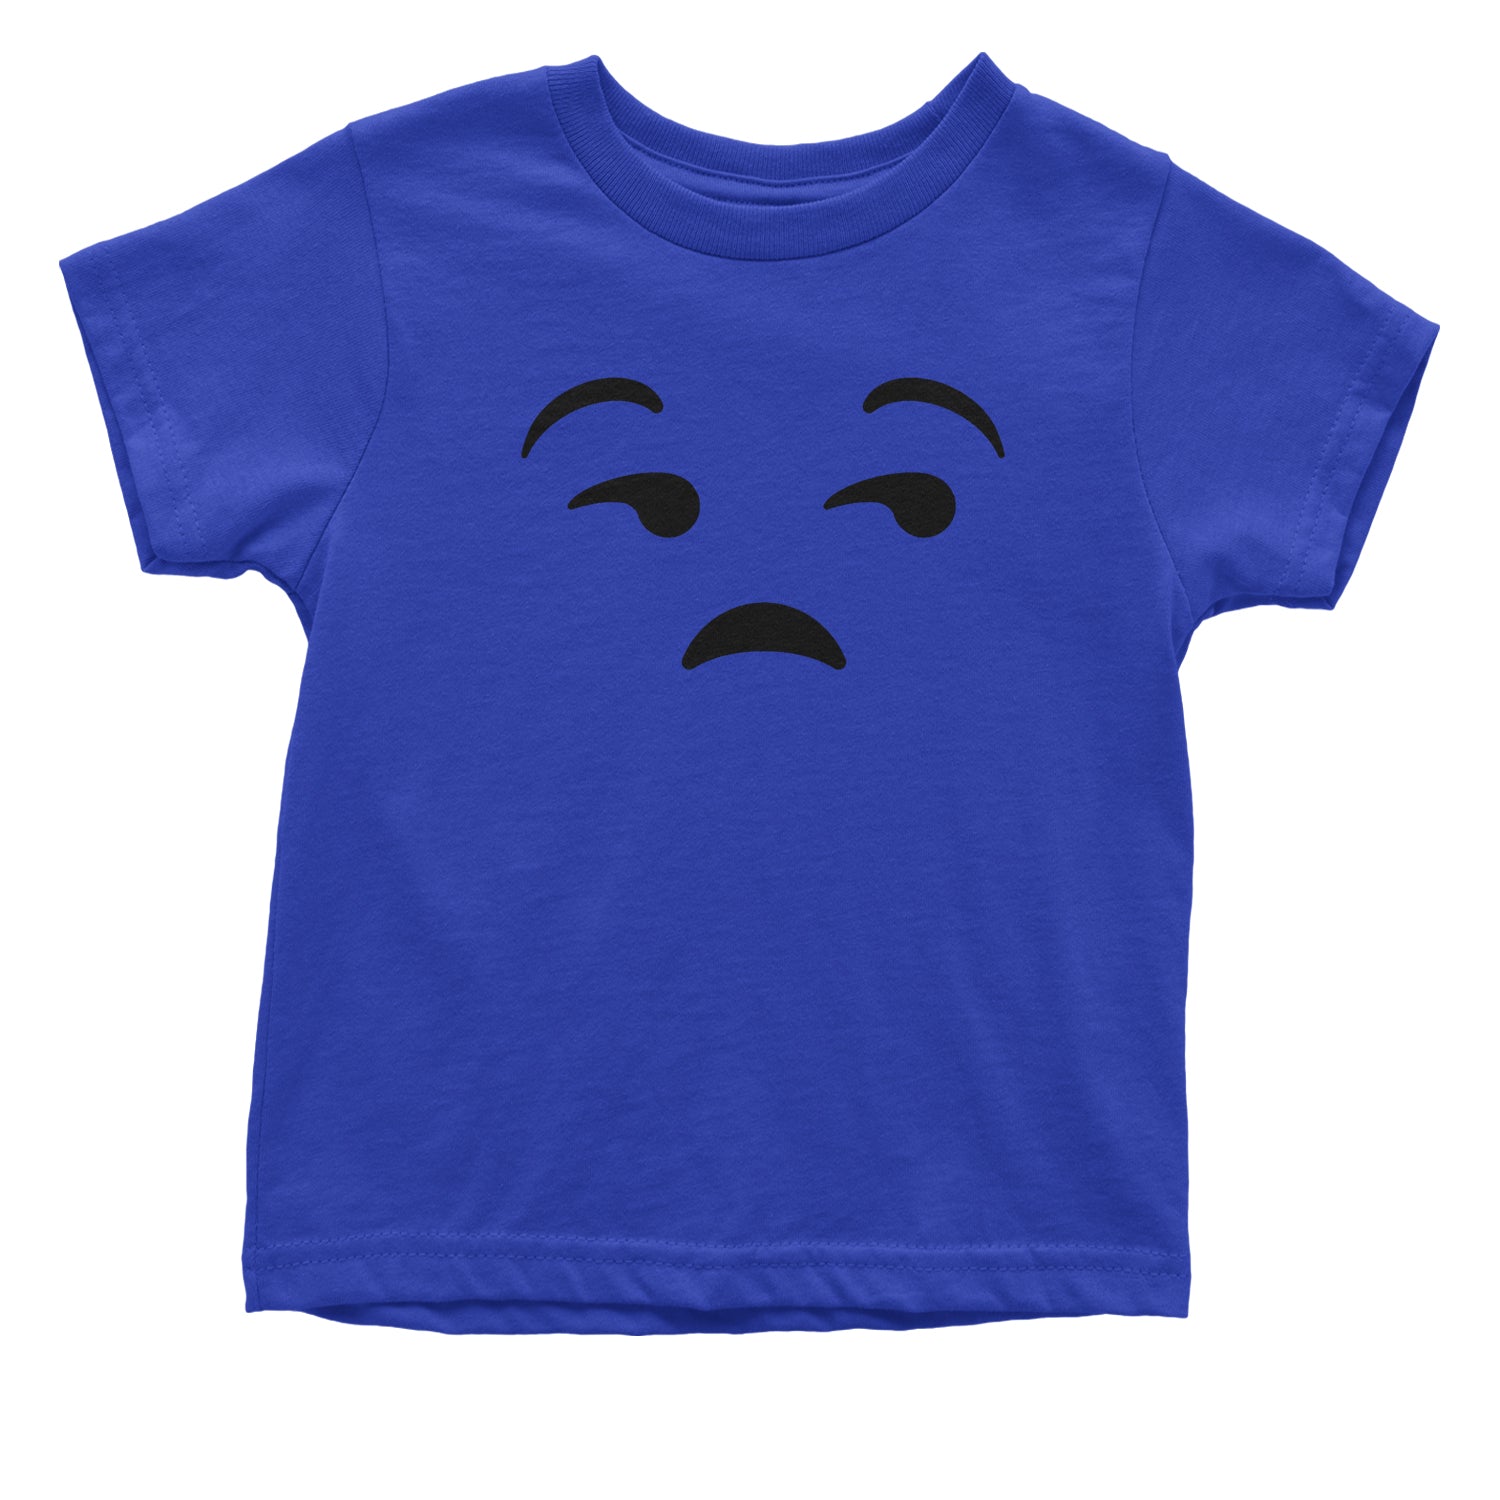 Emoticon Whatever Smile Face Toddler T-Shirt cosplay, costume, dress, emoji, emote, face, halloween, smiley, up, yellow by Expression Tees